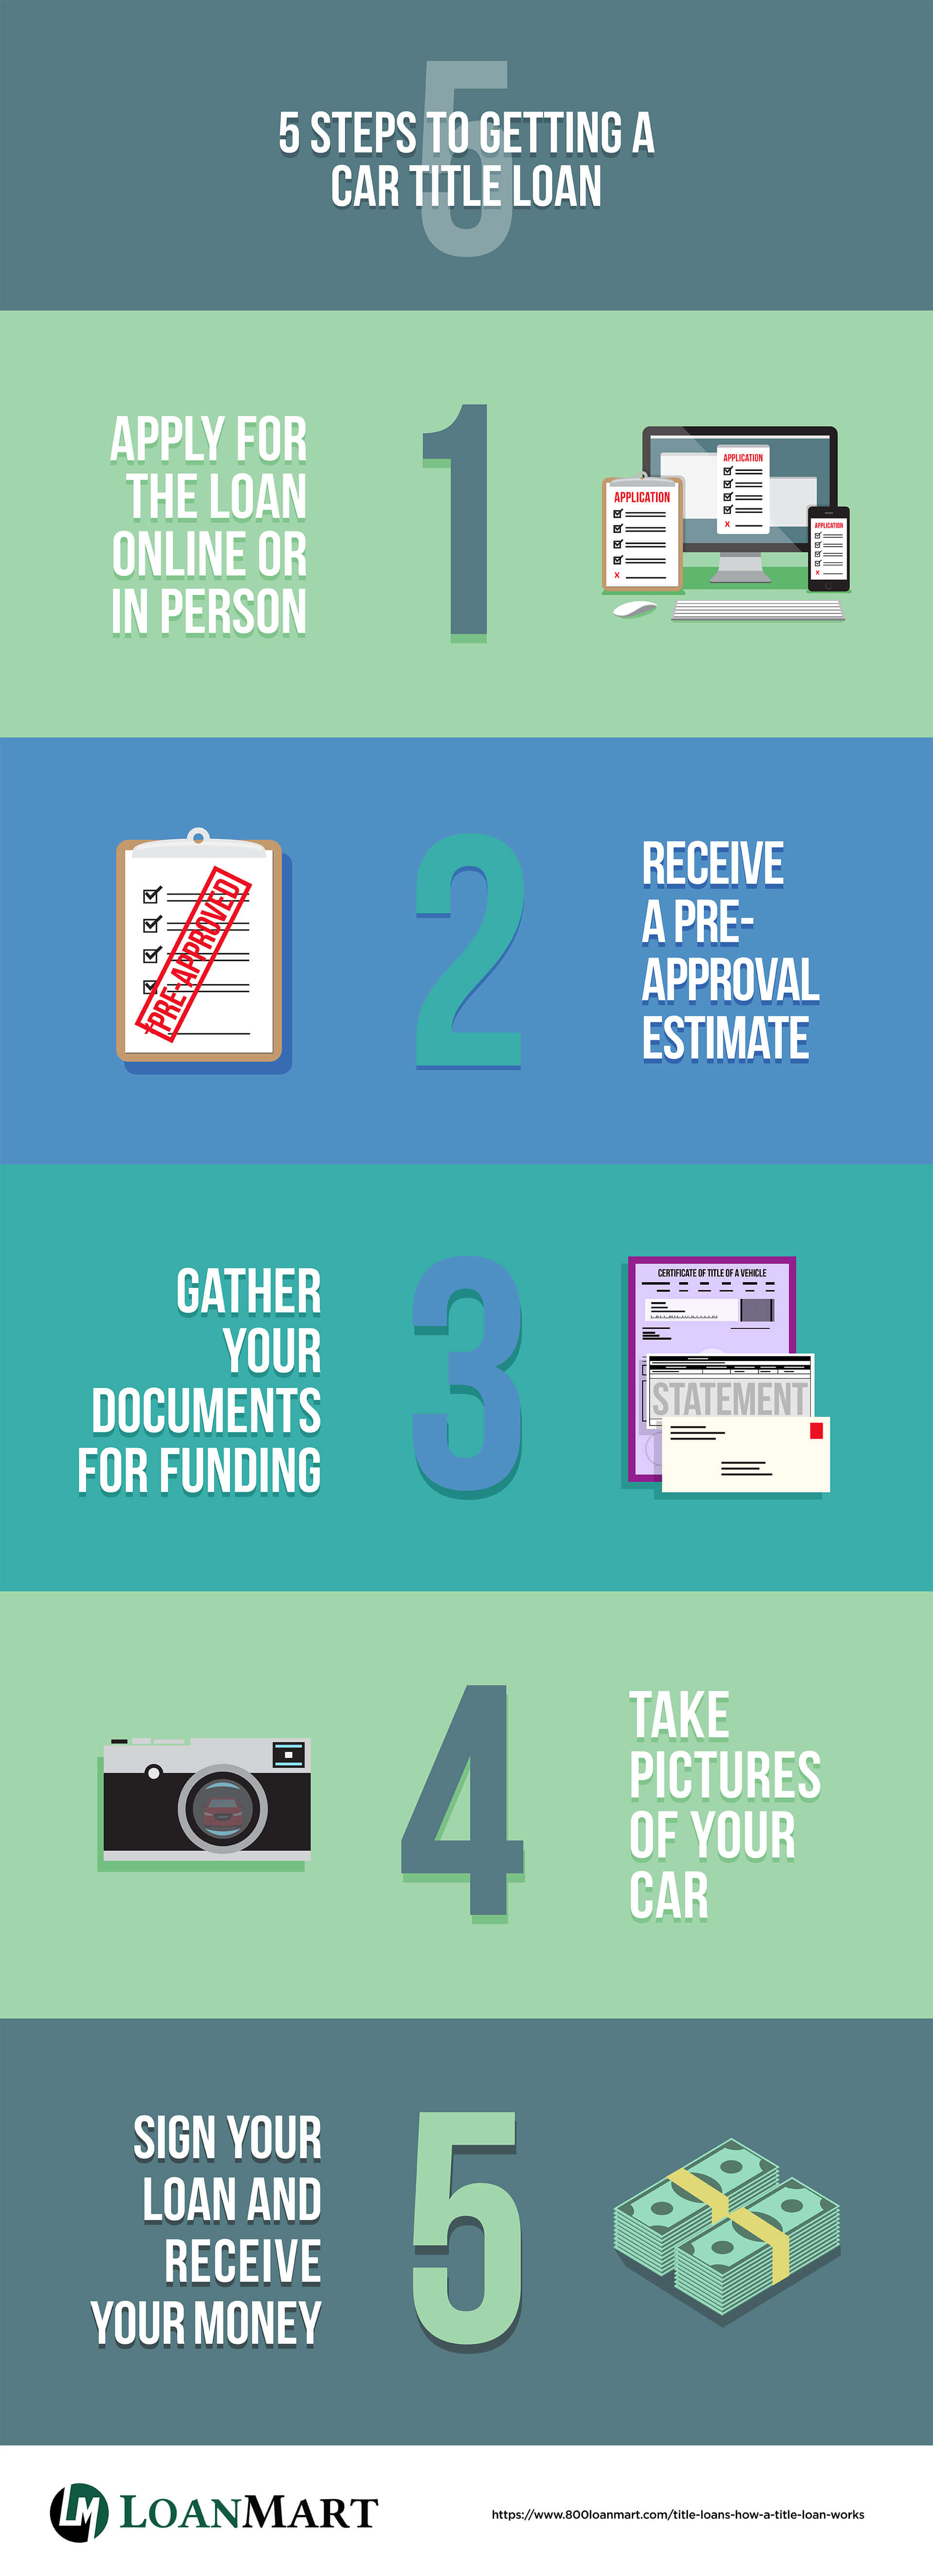 How to Get Approved for a Title Loan